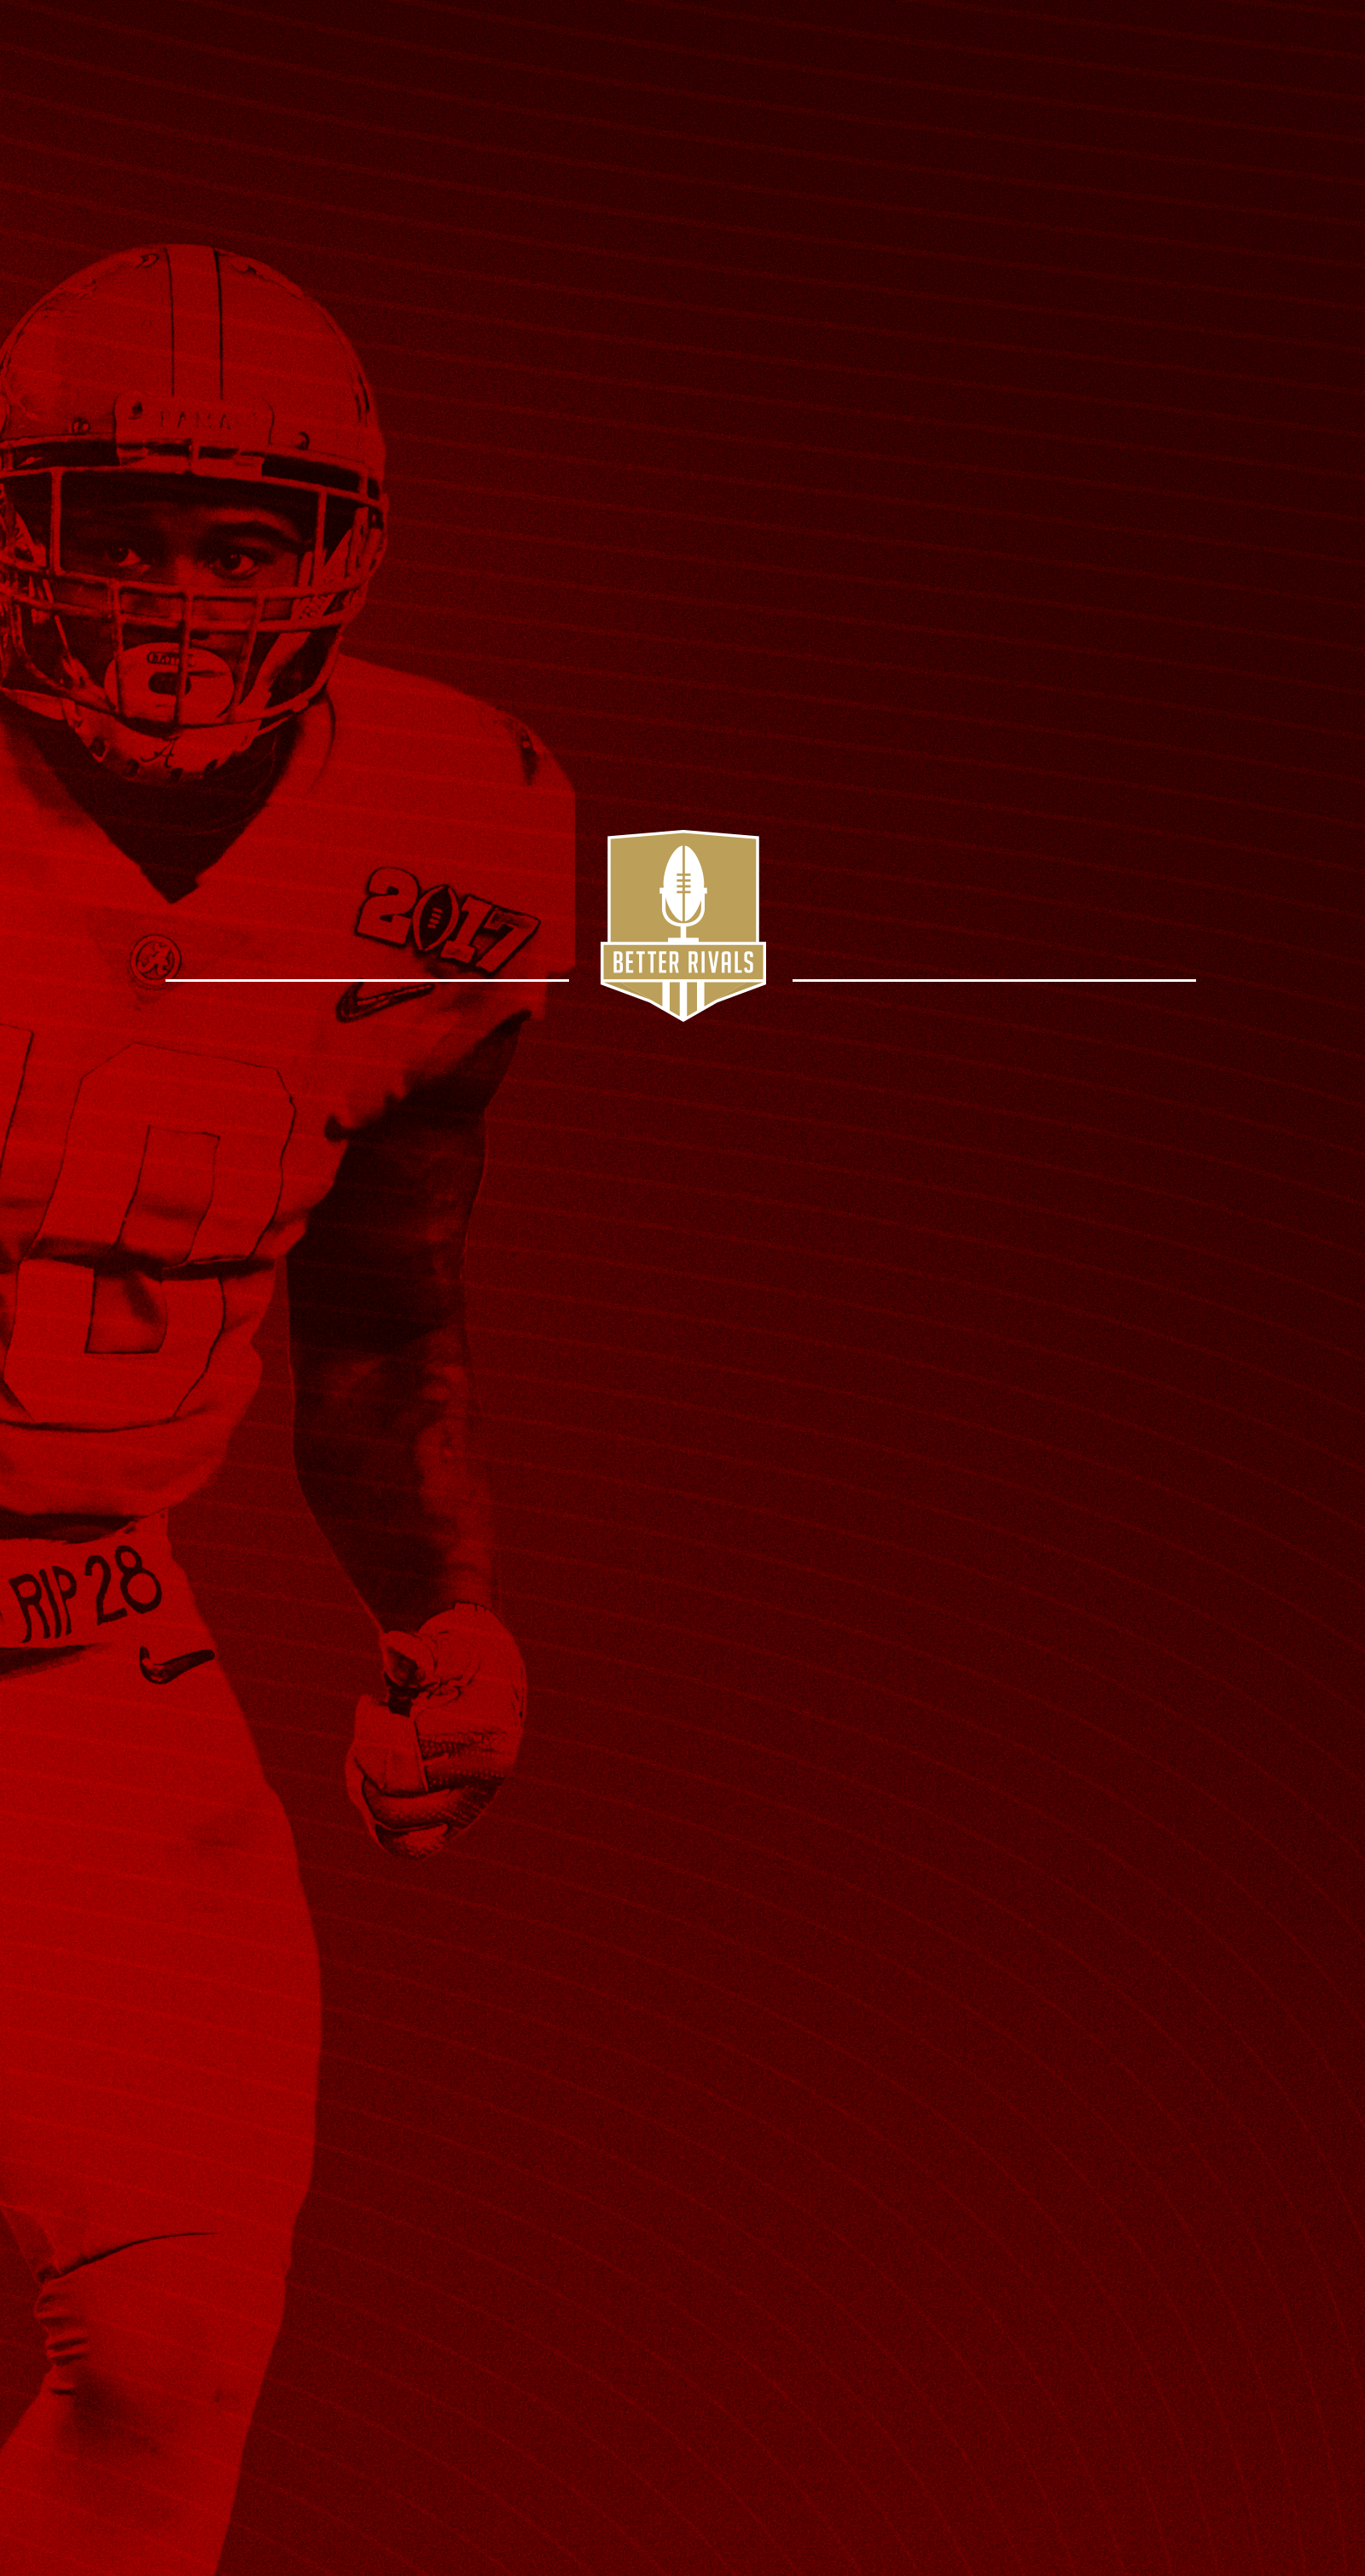 49ers 2017 schedule wallpapers for iPhone, Android, desktop - Niners Nation